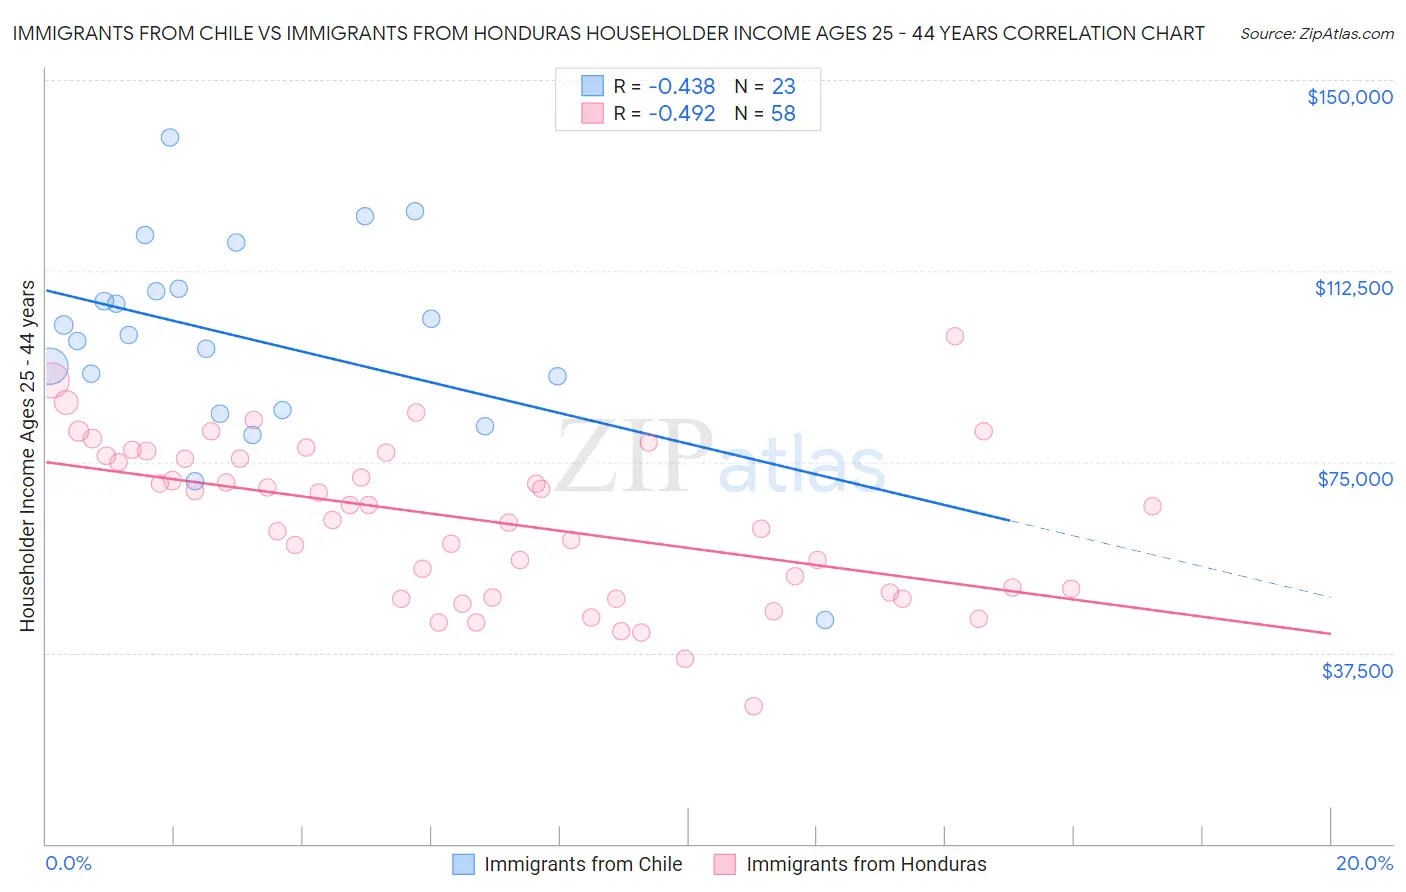 Immigrants from Chile vs Immigrants from Honduras Householder Income Ages 25 - 44 years